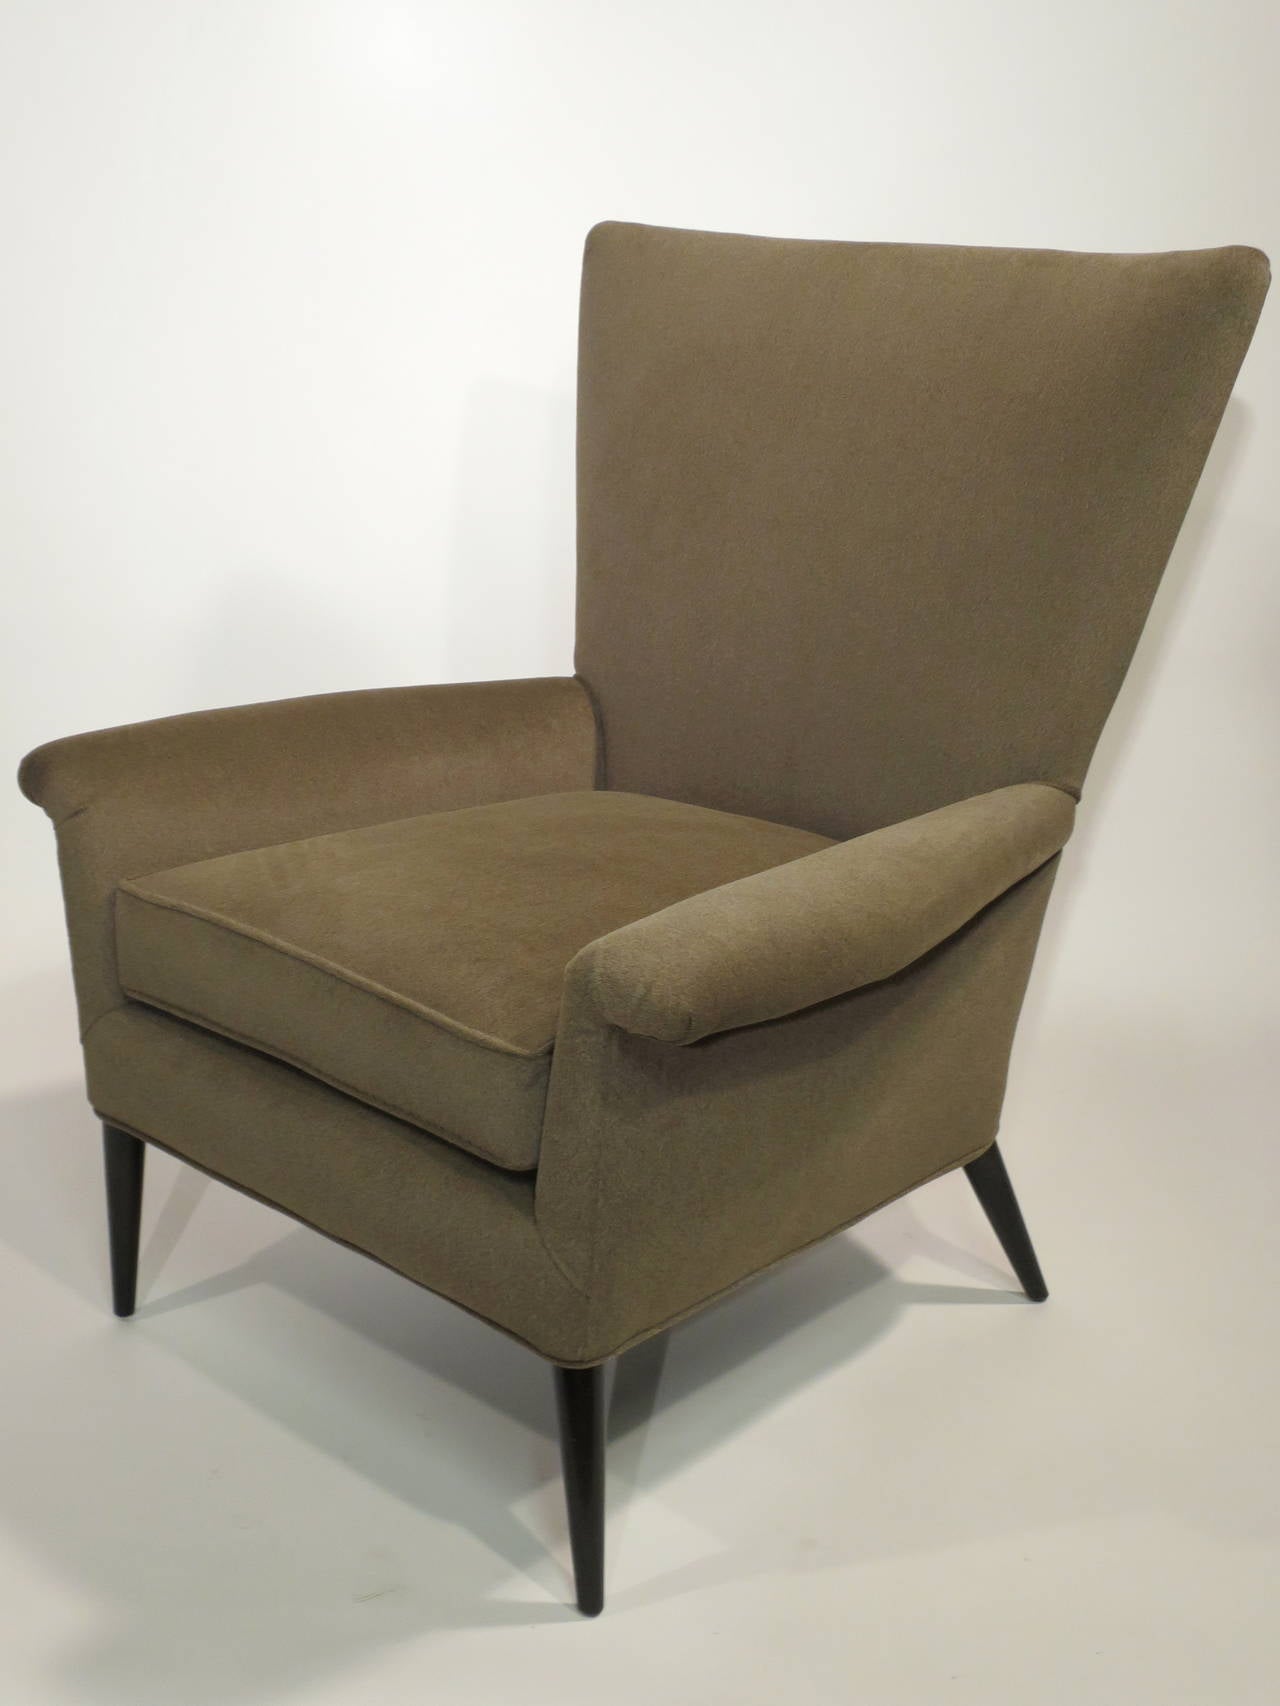 Paul McCobb Lounge Chair #3045.  Excellent reupholstered condition.  Circa 1950s.